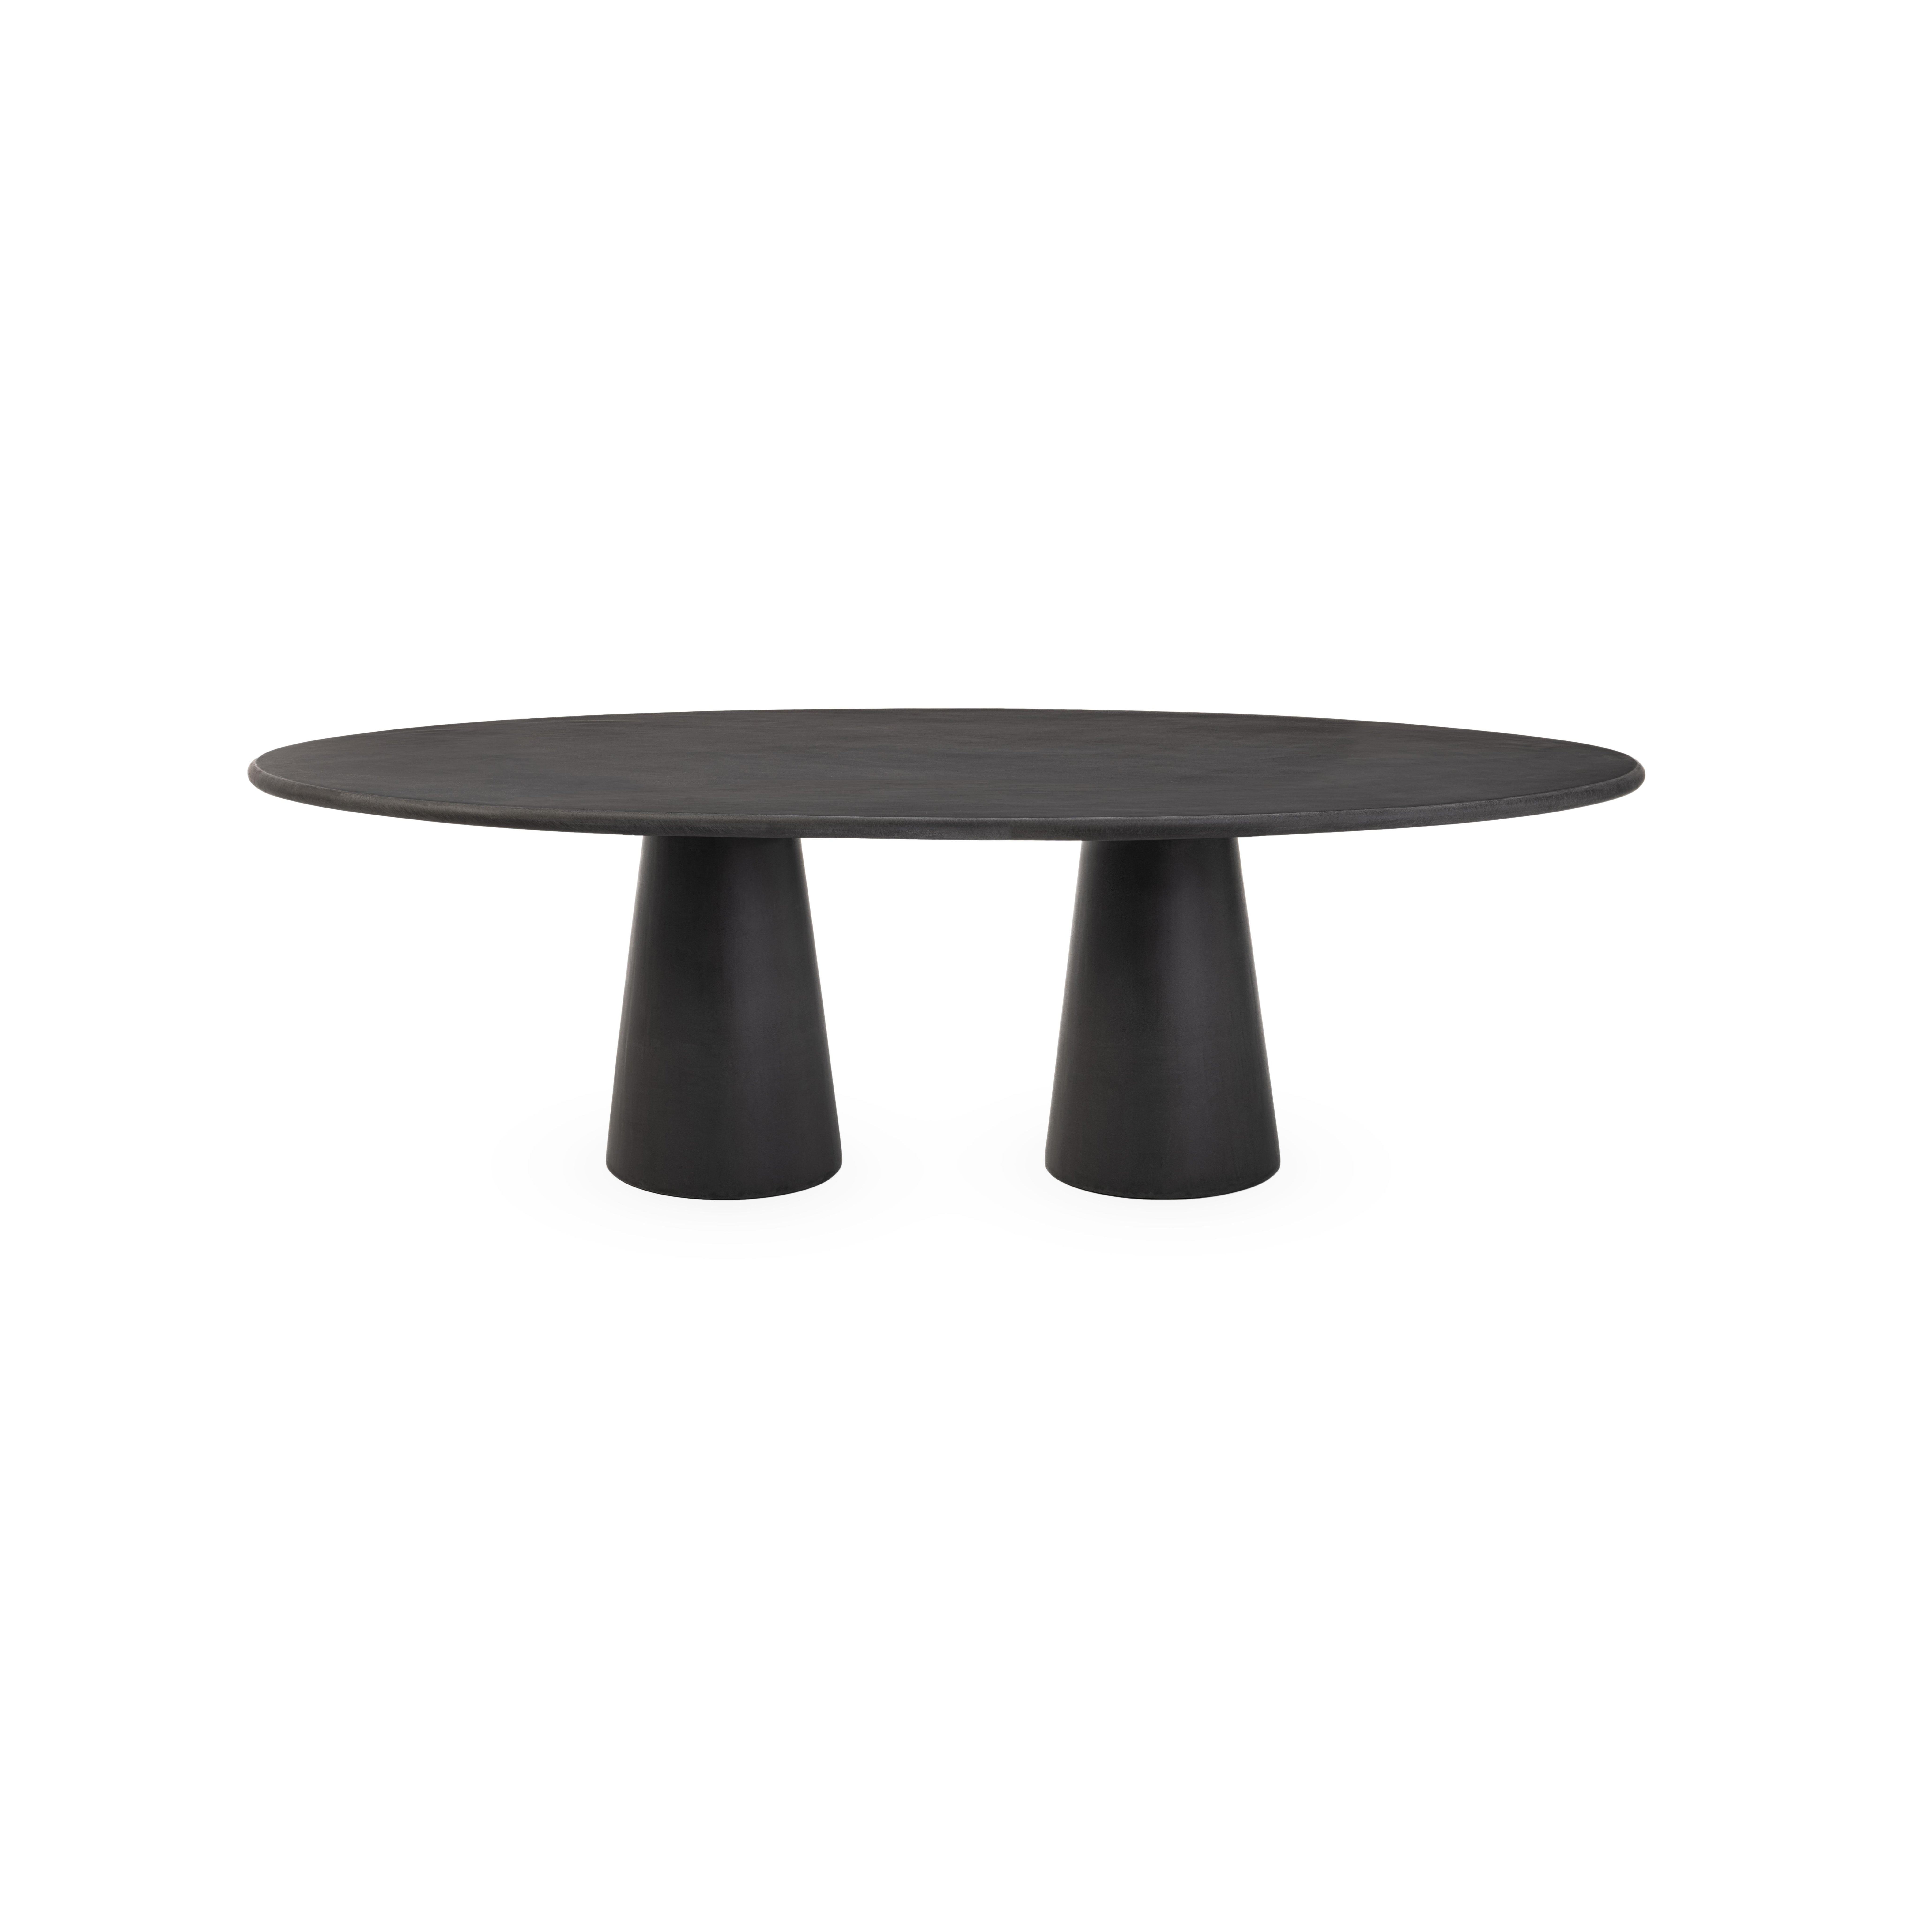 Natural Plaster Dining Table "Ellipsis" 320 by Isabelle Beaumont For Sale